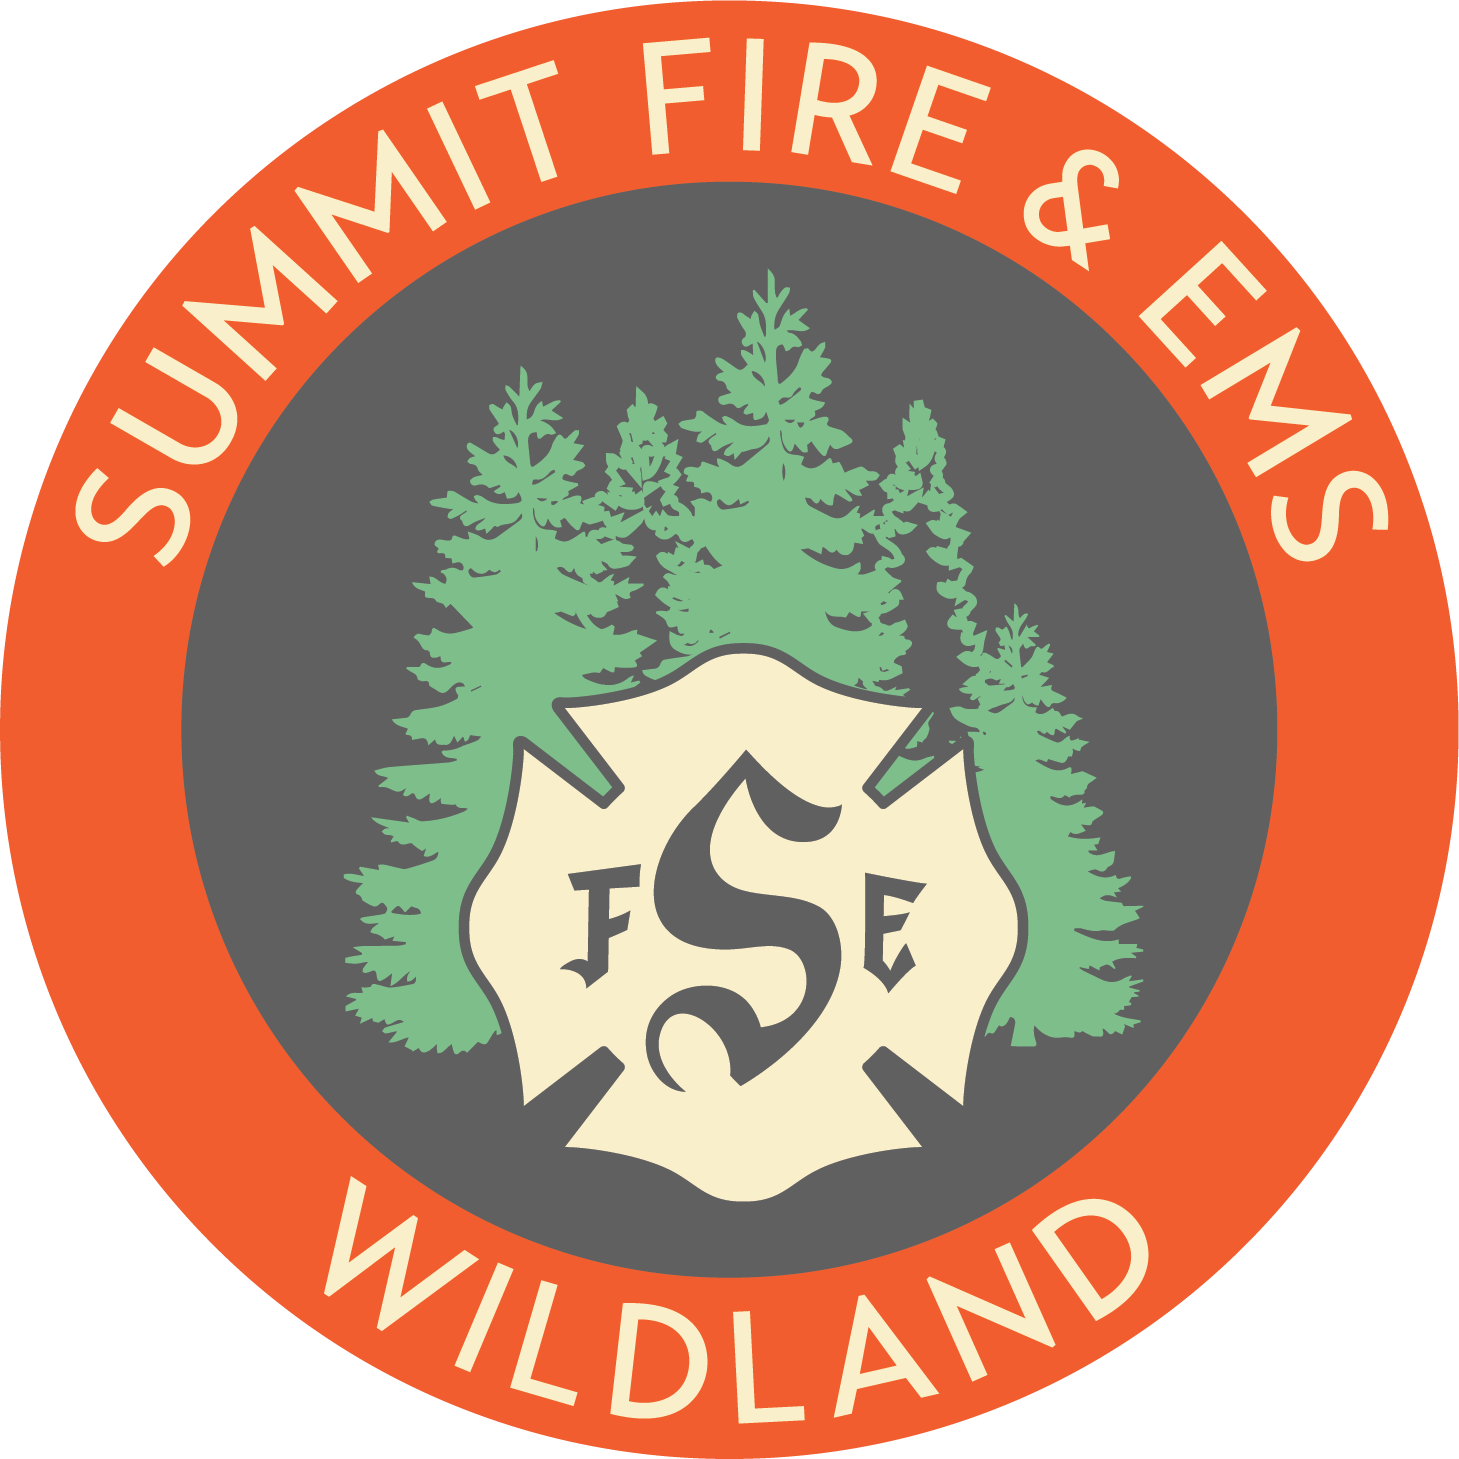 image of the Summit Fire & EMS logo